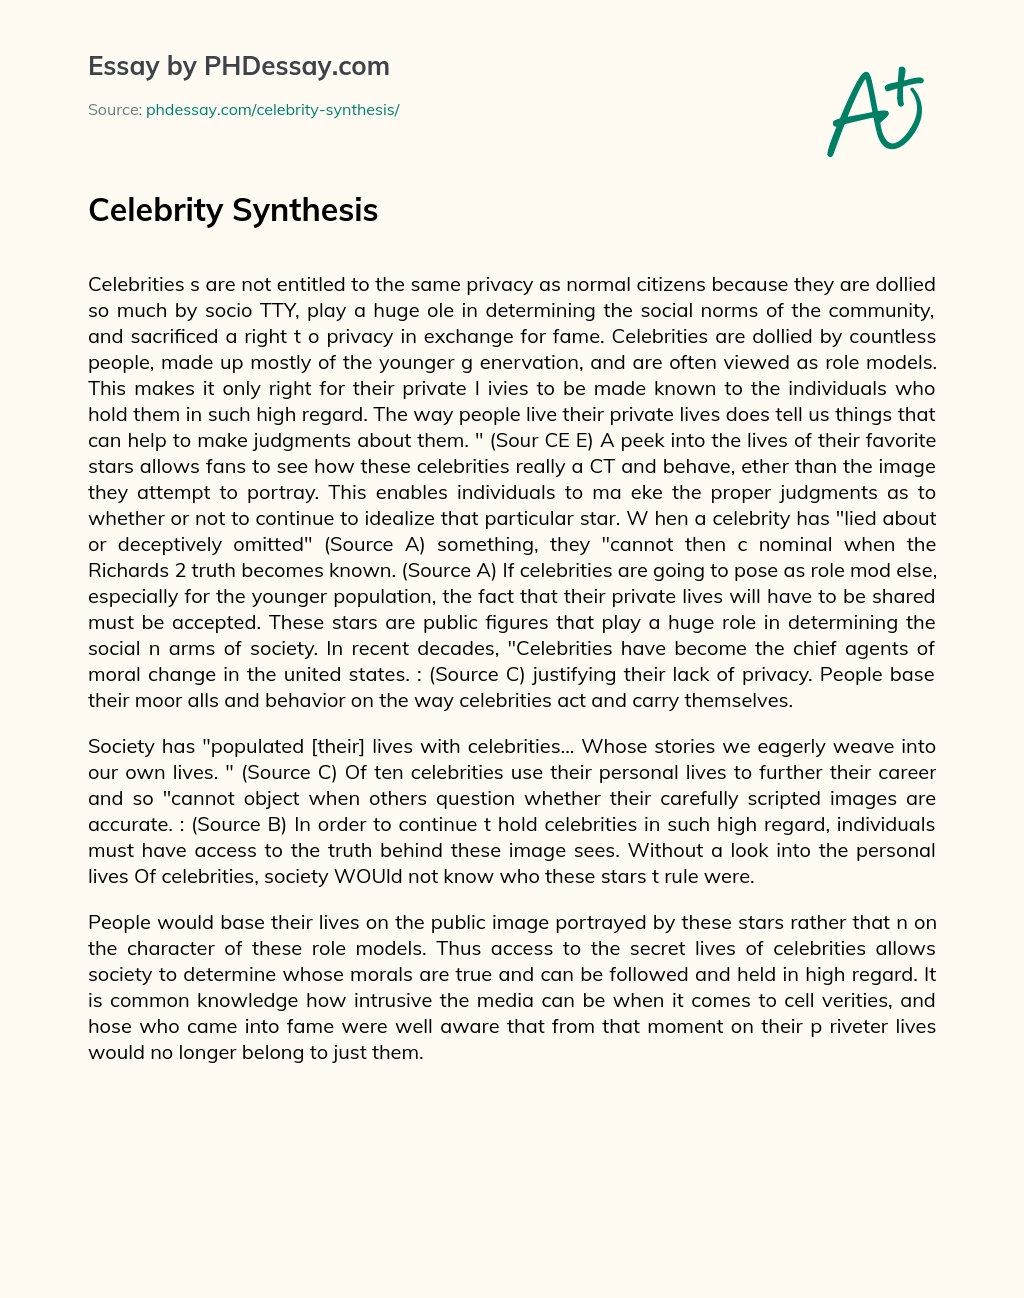 Celebrity Synthesis